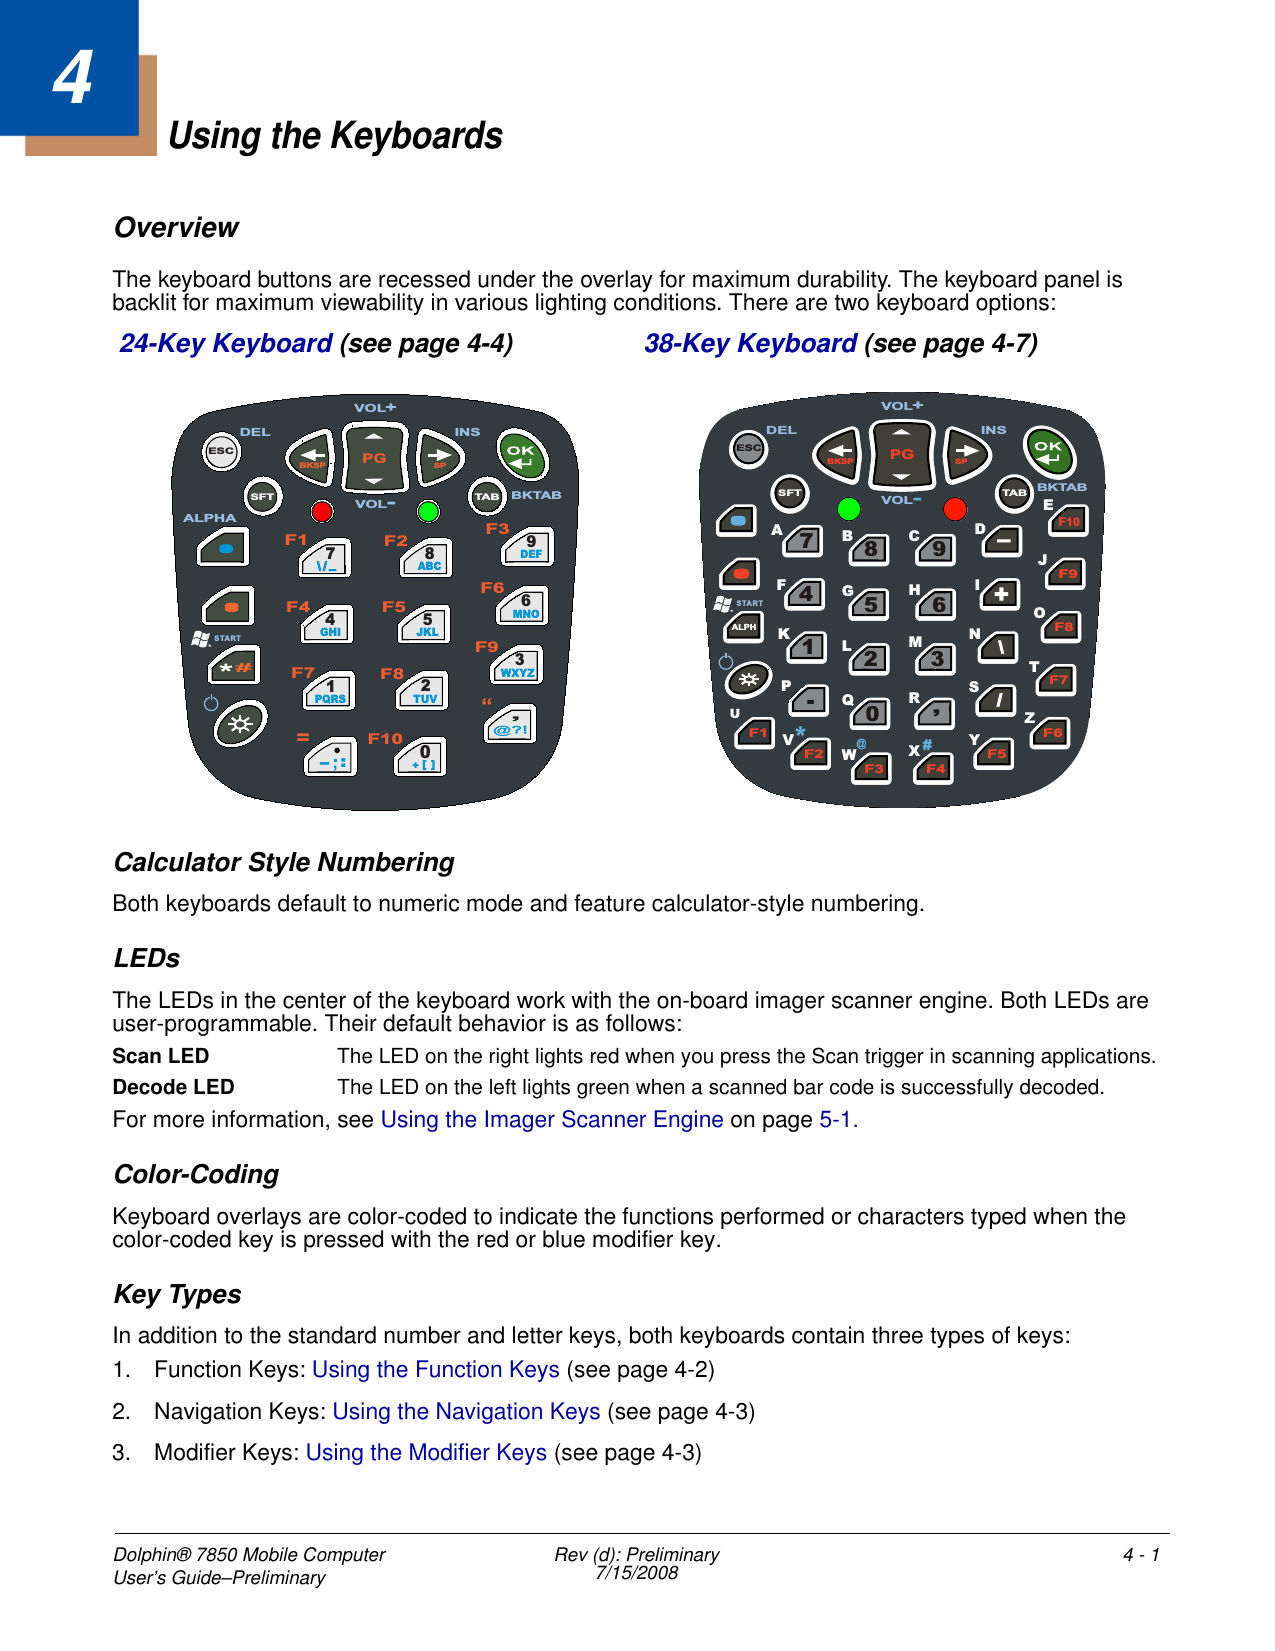 Dolphin® 7850 Mobile Computer User’s Guide–Preliminary  Rev (d): Preliminary7/15/2008 4 - 14Using the KeyboardsOverviewThe keyboard buttons are recessed under the overlay for maximum durability. The keyboard panel is backlit for maximum viewability in various lighting conditions. There are two keyboard options: Calculator Style NumberingBoth keyboards default to numeric mode and feature calculator-style numbering.LEDsThe LEDs in the center of the keyboard work with the on-board imager scanner engine. Both LEDs are user-programmable. Their default behavior is as follows:Scan LED  The LED on the right lights red when you press the Scan trigger in scanning applications.Decode LED  The LED on the left lights green when a scanned bar code is successfully decoded.For more information, see Using the Imager Scanner Engine on page 5-1.Color-CodingKeyboard overlays are color-coded to indicate the functions performed or characters typed when the color-coded key is pressed with the red or blue modifier key. Key TypesIn addition to the standard number and letter keys, both keyboards contain three types of keys:1. Function Keys: Using the Function Keys (see page 4-2)2. Navigation Keys: Using the Navigation Keys (see page 4-3) 3. Modifier Keys: Using the Modifier Keys (see page 4-3)24-Key Keyboard (see page 4-4) 38-Key Keyboard (see page 4-7)PGBKSPSPESCTABSFT74GHI1PQRS8ABC5JKL2TUV9DEF6MNO3WXYZ/\ _0+[]:–F1 F2F3F4 F5F6F7 F8F9F10VOL+DEL INSBKTABSTARTVOL-ALPHA“=F4 F5 F6 F7 F8 F9 F10 - + \ \ / / , 3 6 9 0 2 5 8 7 4 1 . BKSP PG SP TA B ESC ALPH F 1 F2 F3 SFT O B E J U A  C  D F  G  H  I K  L  M  N Q S T V W  X  Y Z ST ART P # *  @ DEL VOL + VOL - INS R BKTAB